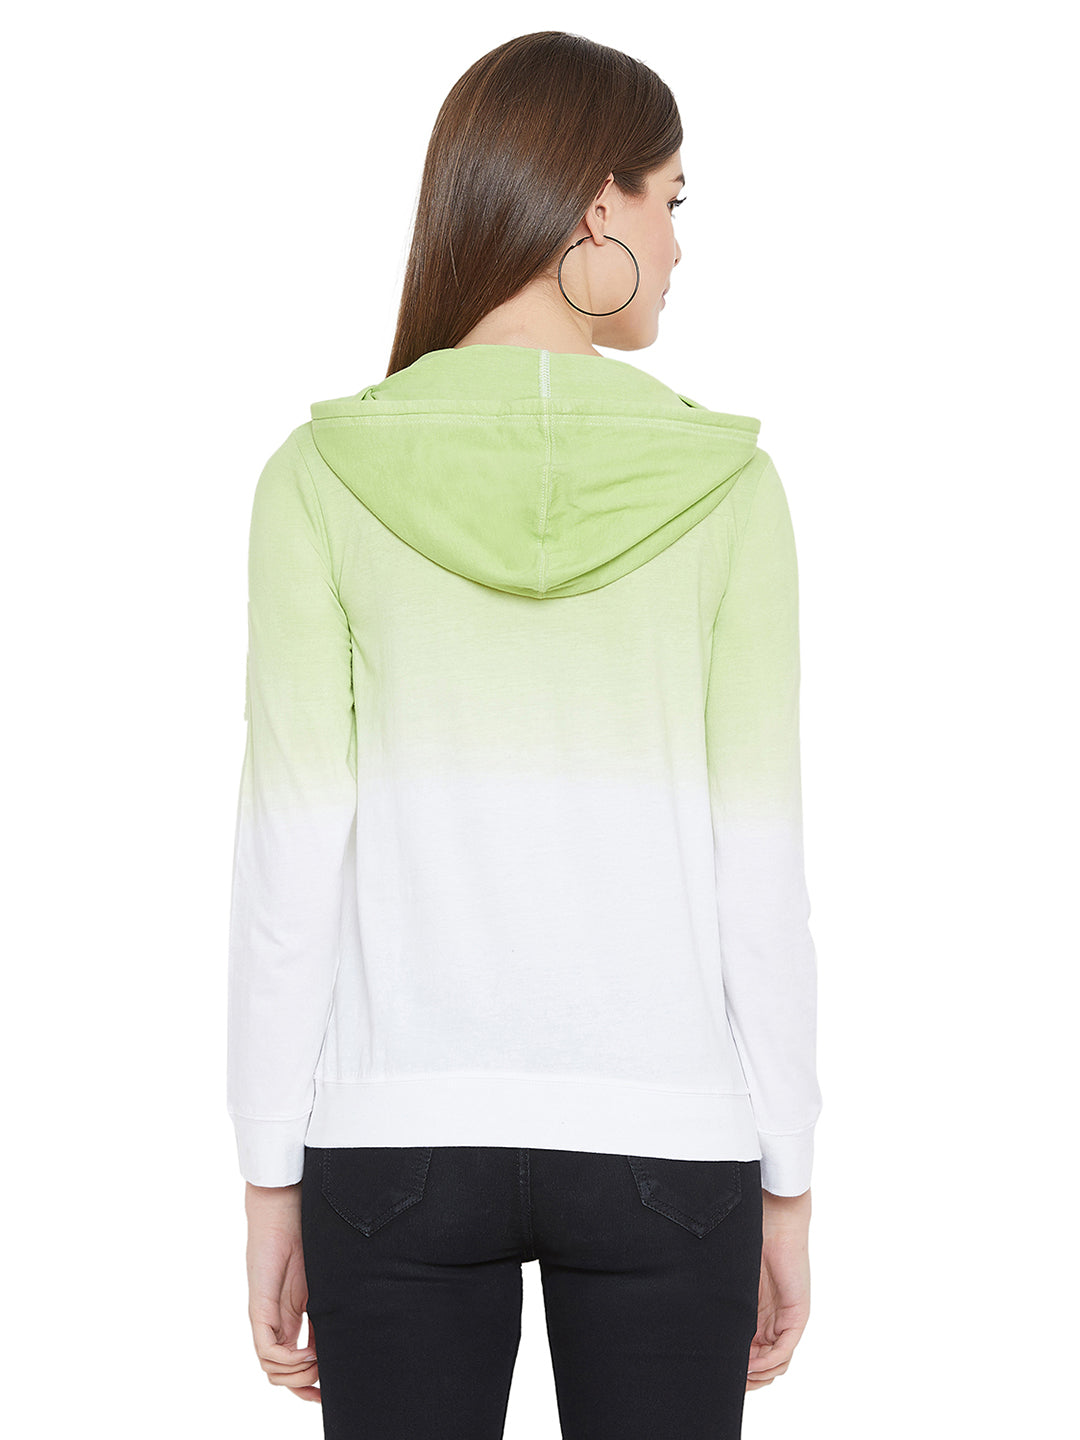 White/Green Full Sleeves Ombre Dyed Hooded T-Shirt